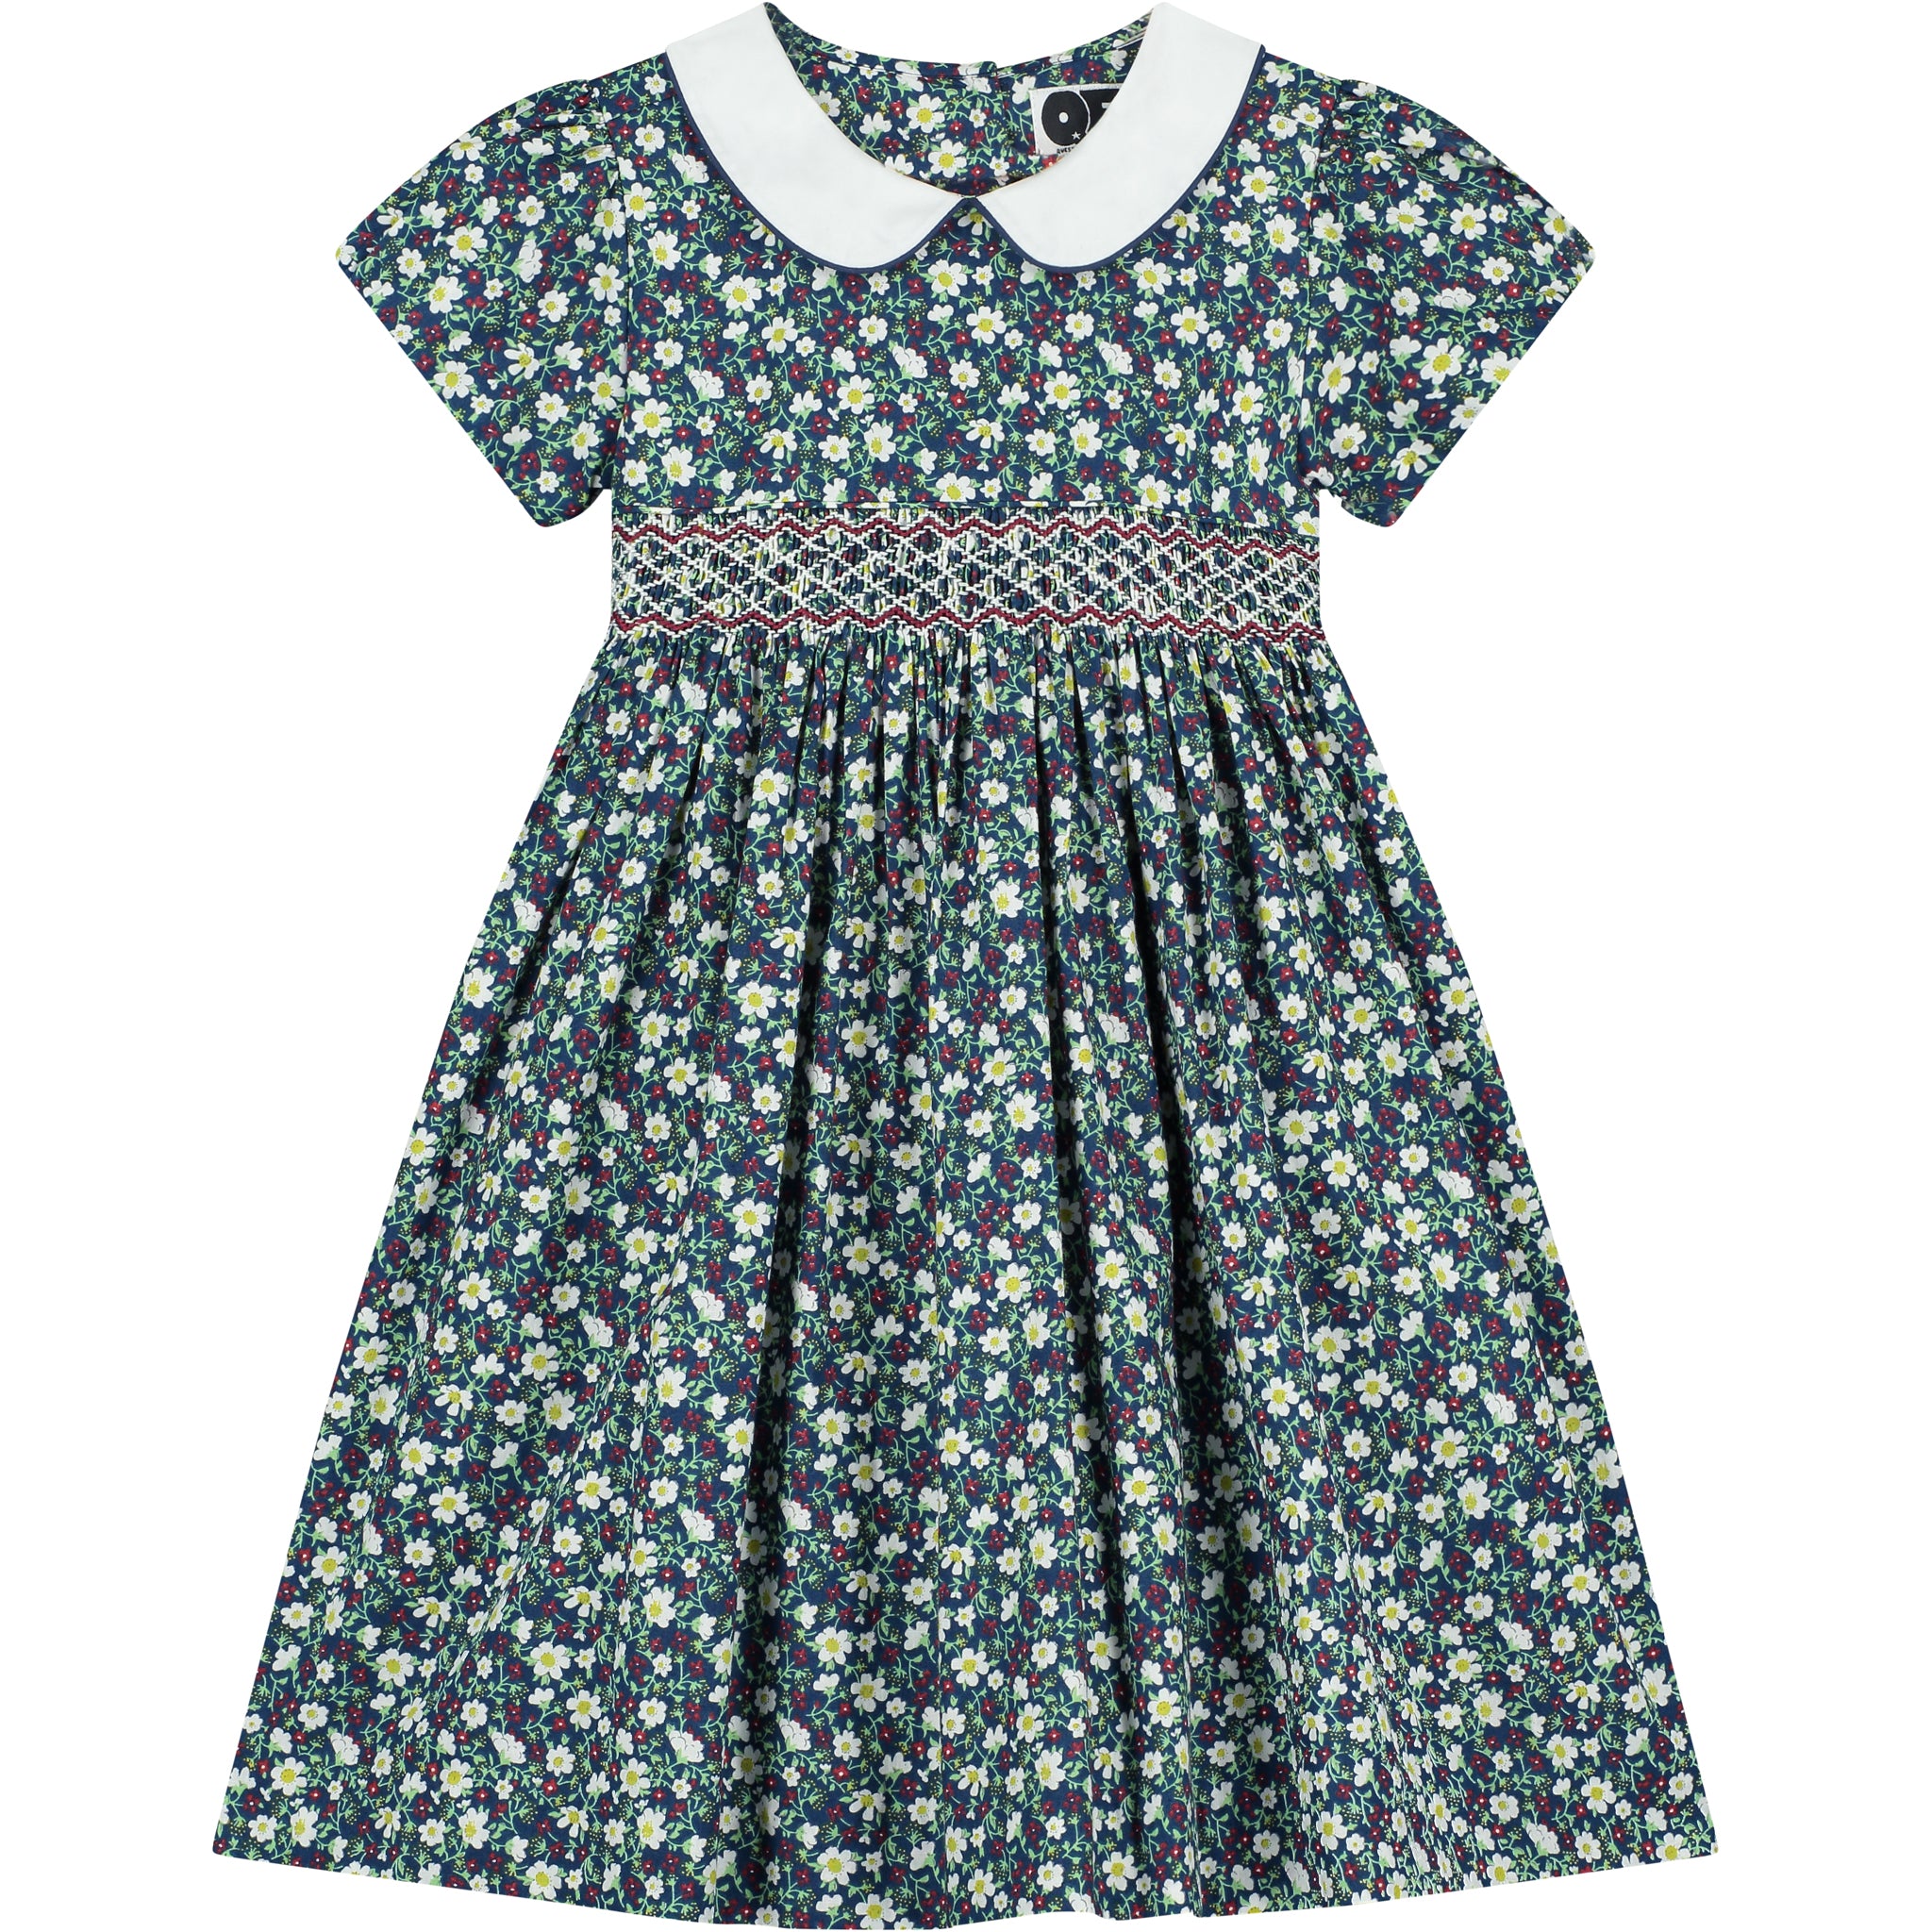 floral smock dress with white Peter Pan collar, front